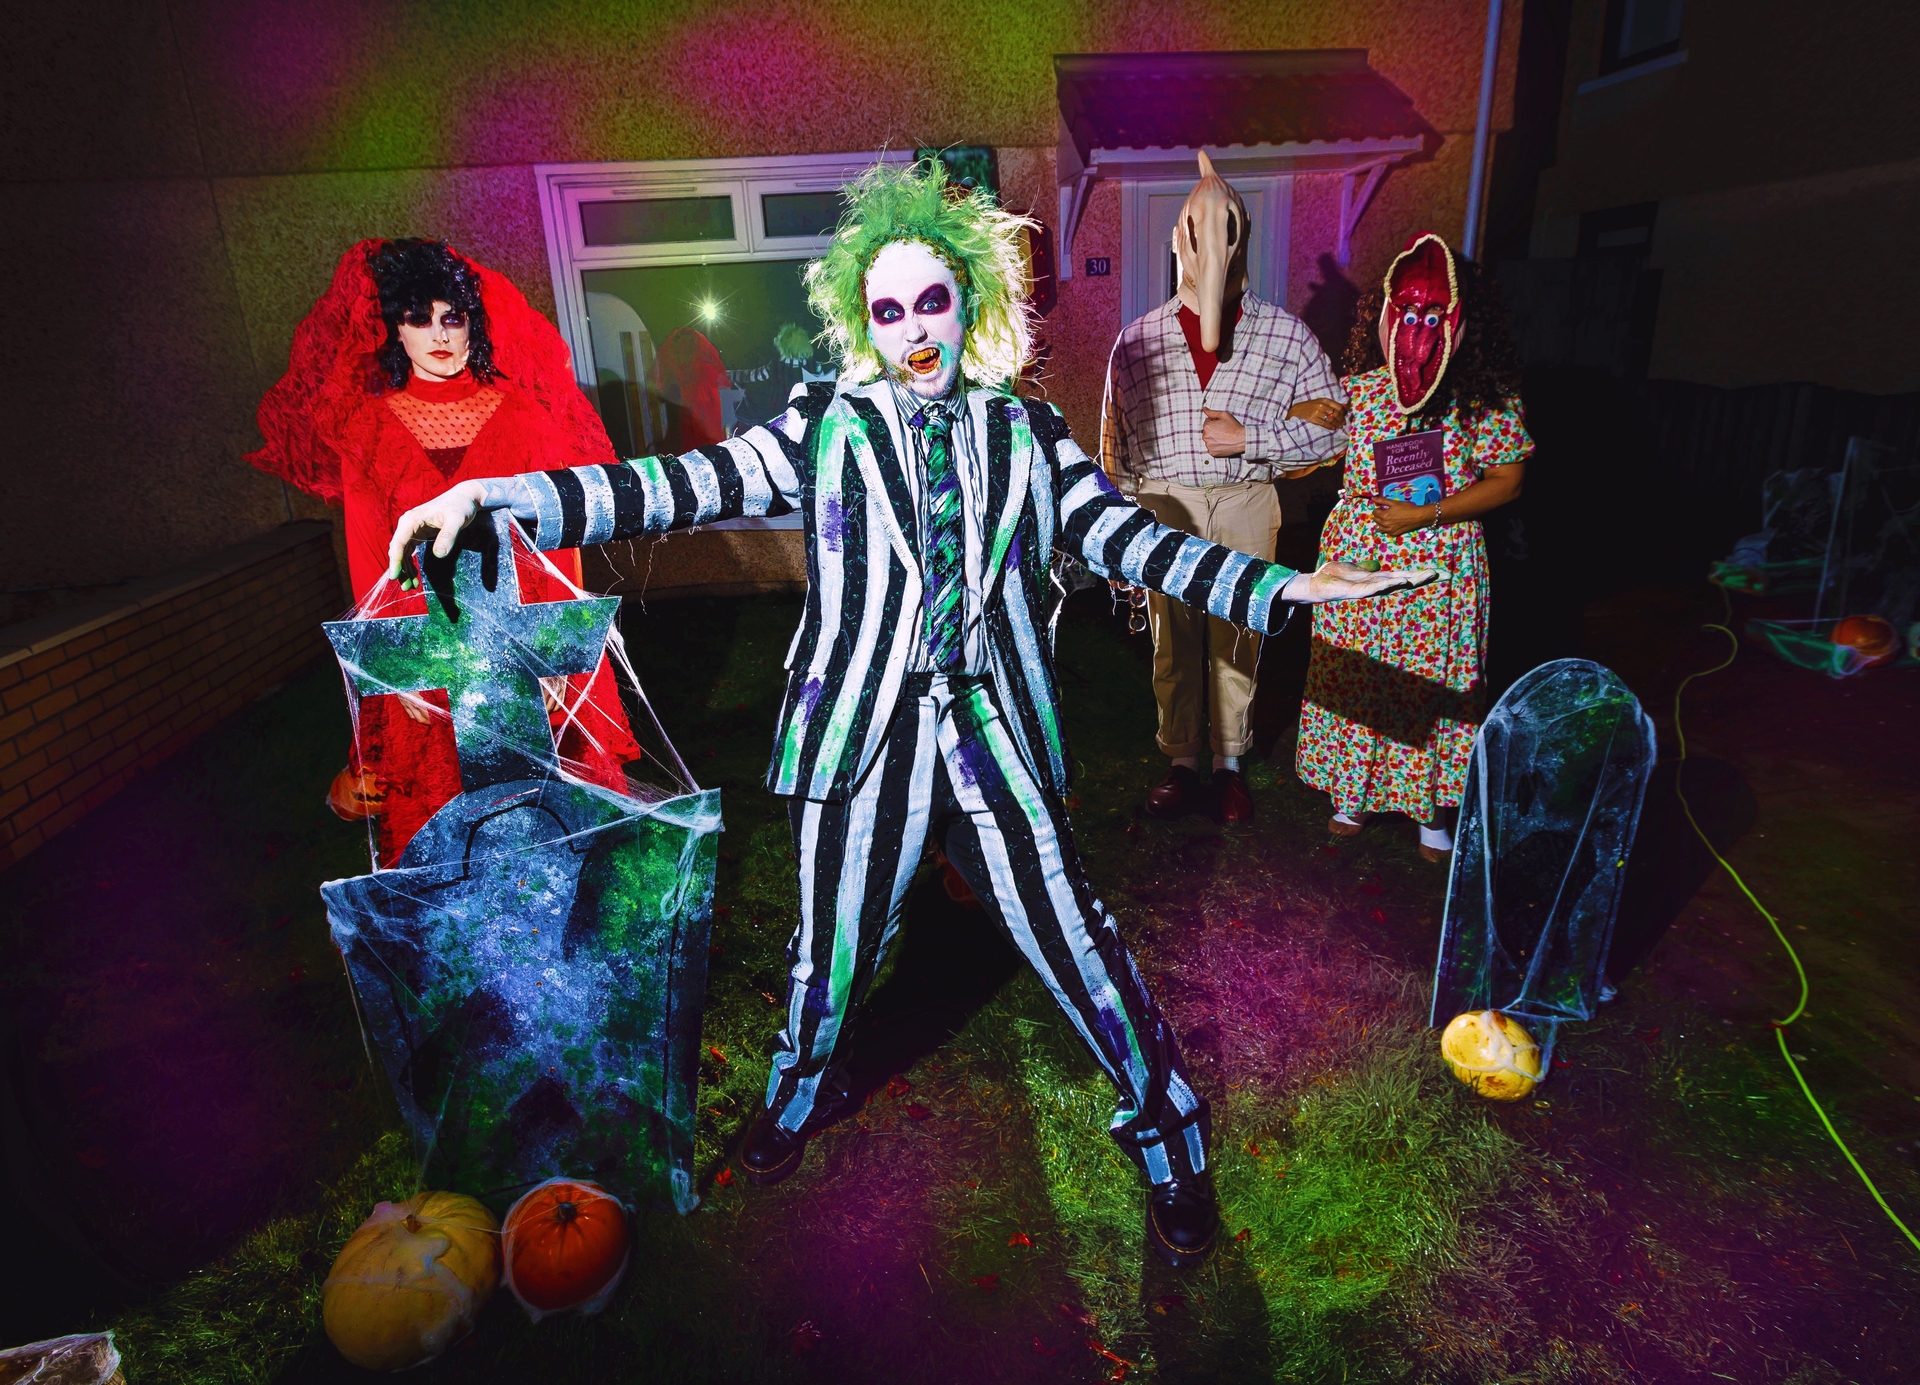 His Beetlejuice display in 2021 saw hundreds of visitors.